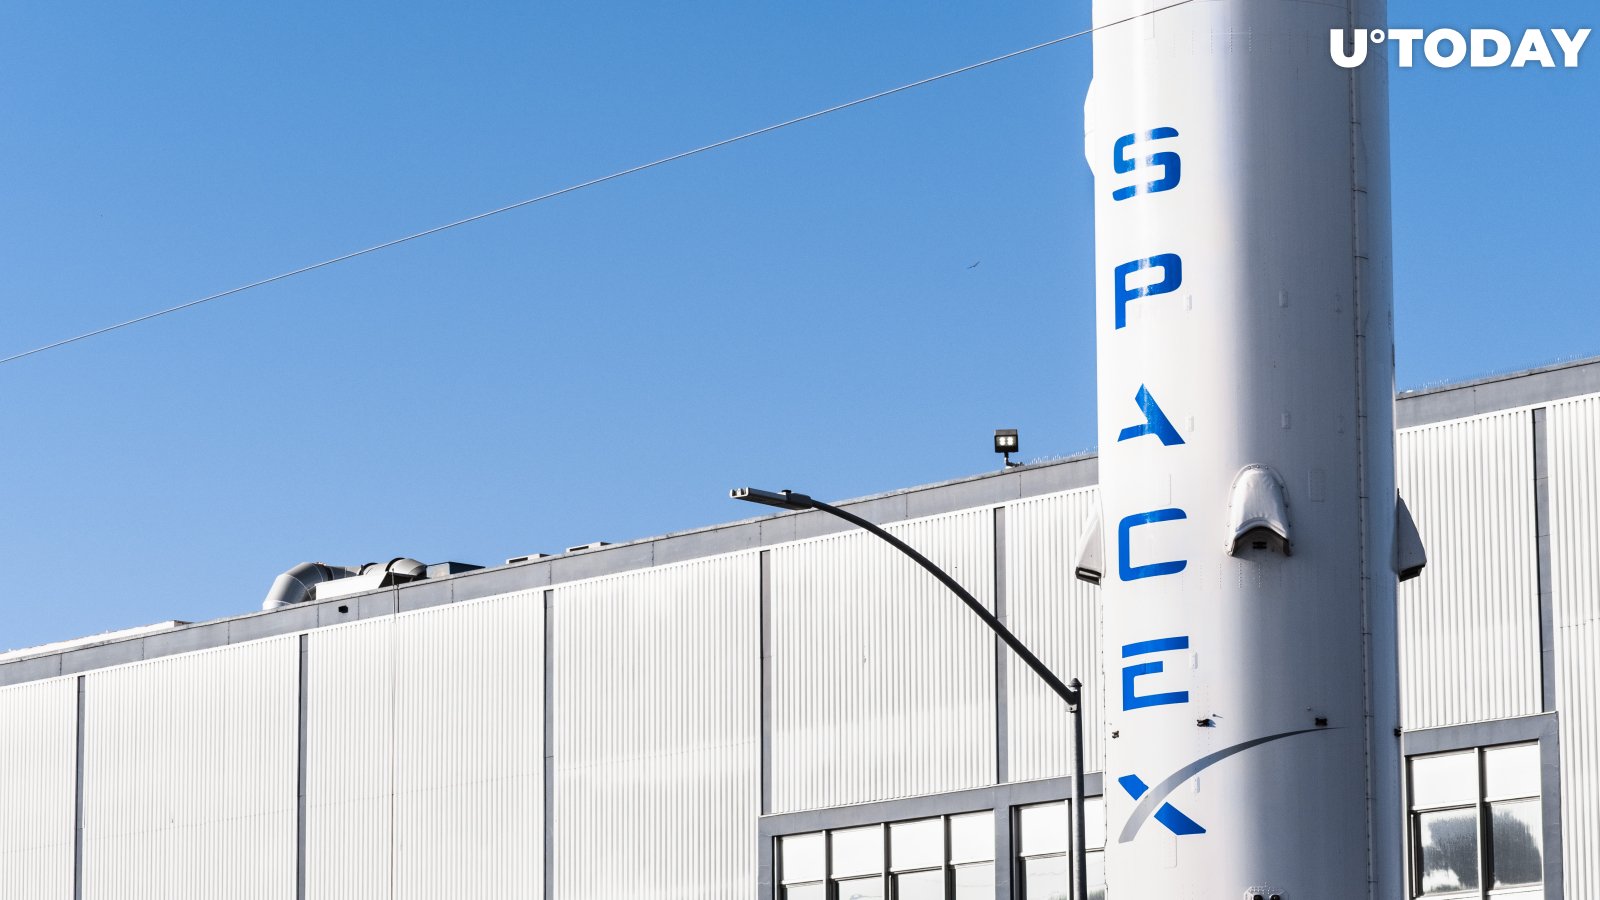 SpaceX Has Bitcoin on Its Balance Sheet: Anthony Scaramucci 